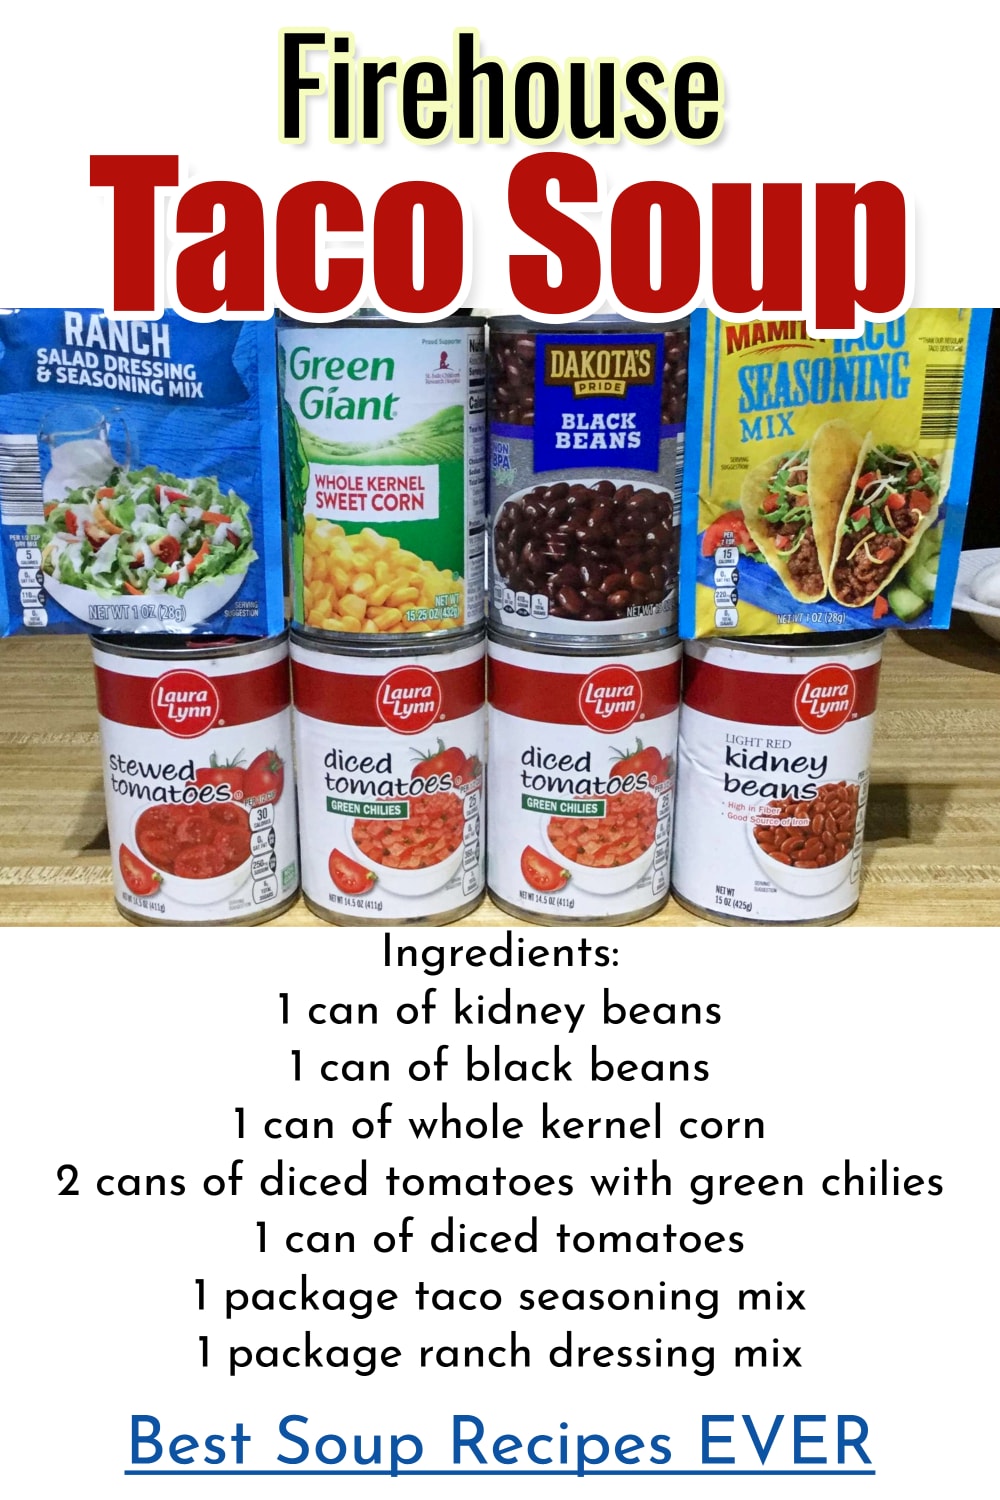 Easy Soup Recipes - easy soup recipes with ingredients and procedure - Firehouse Taco Soup Recipe - ready FAST in your crock pot slow cooker OR stove top - best homemade soup recipes EVER